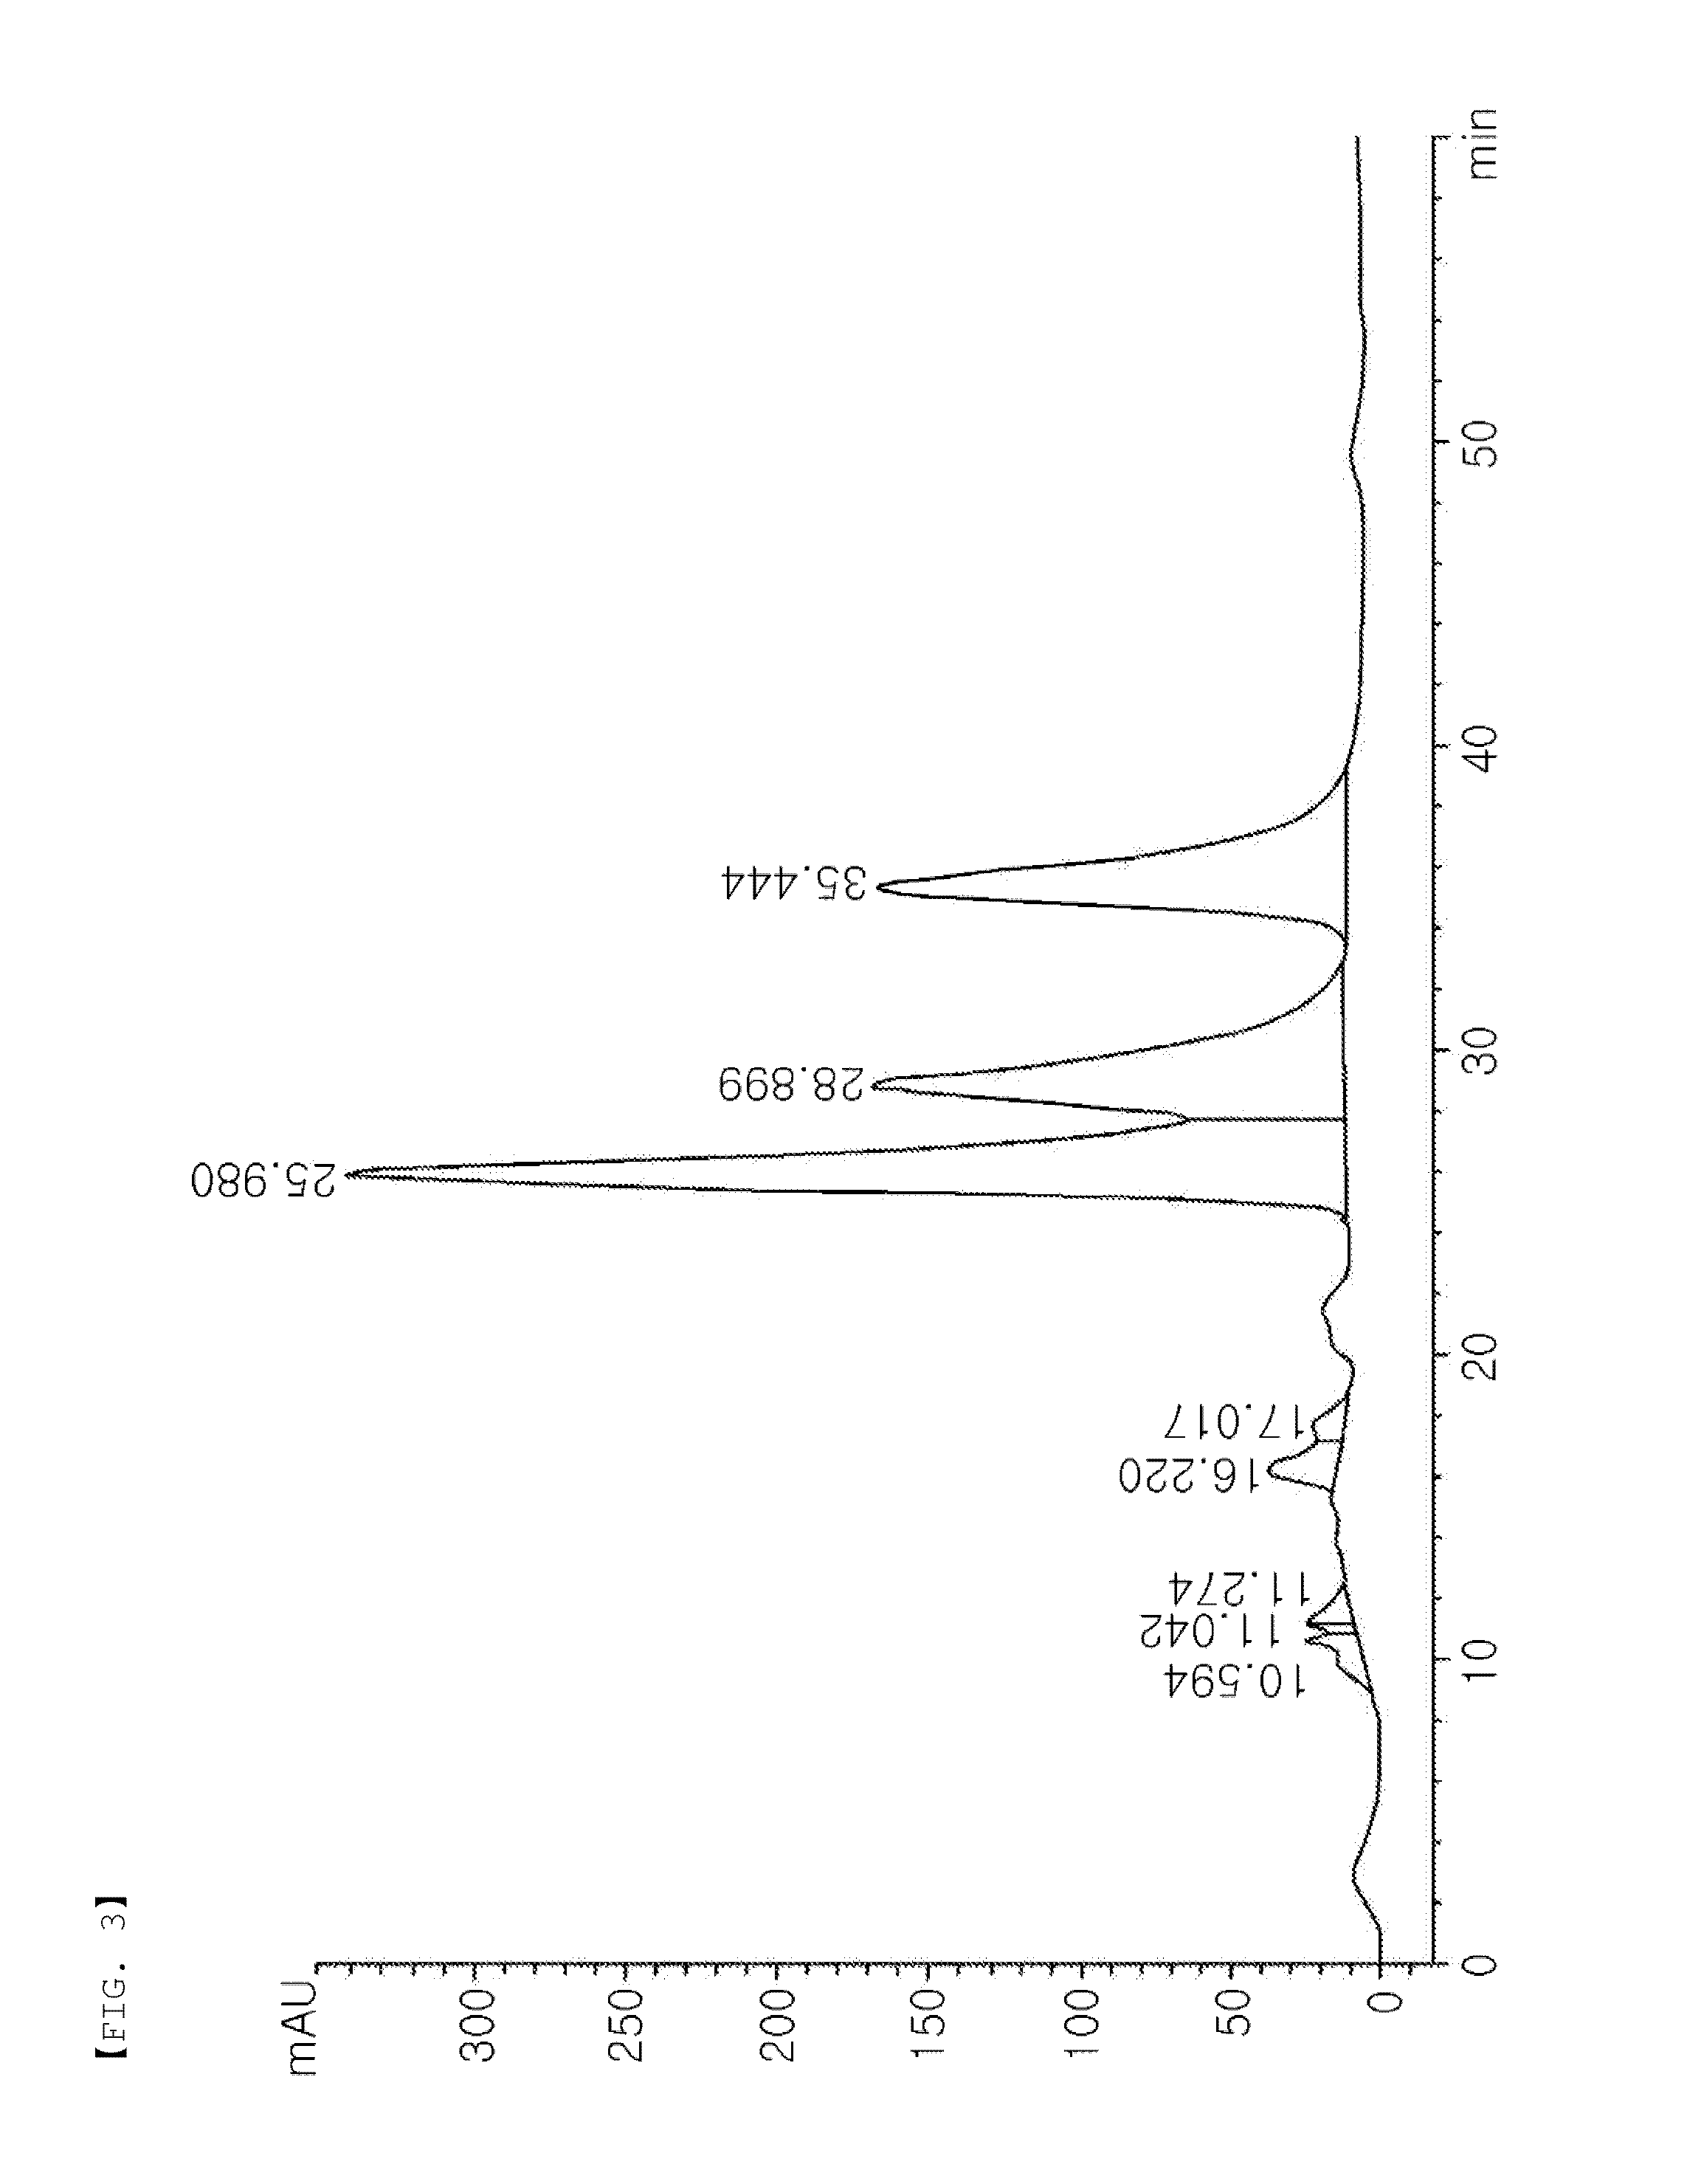 Method of manufacturing rebaudioside a in high yield by recycling by-products produced from manufacturing process for rebaudioside a